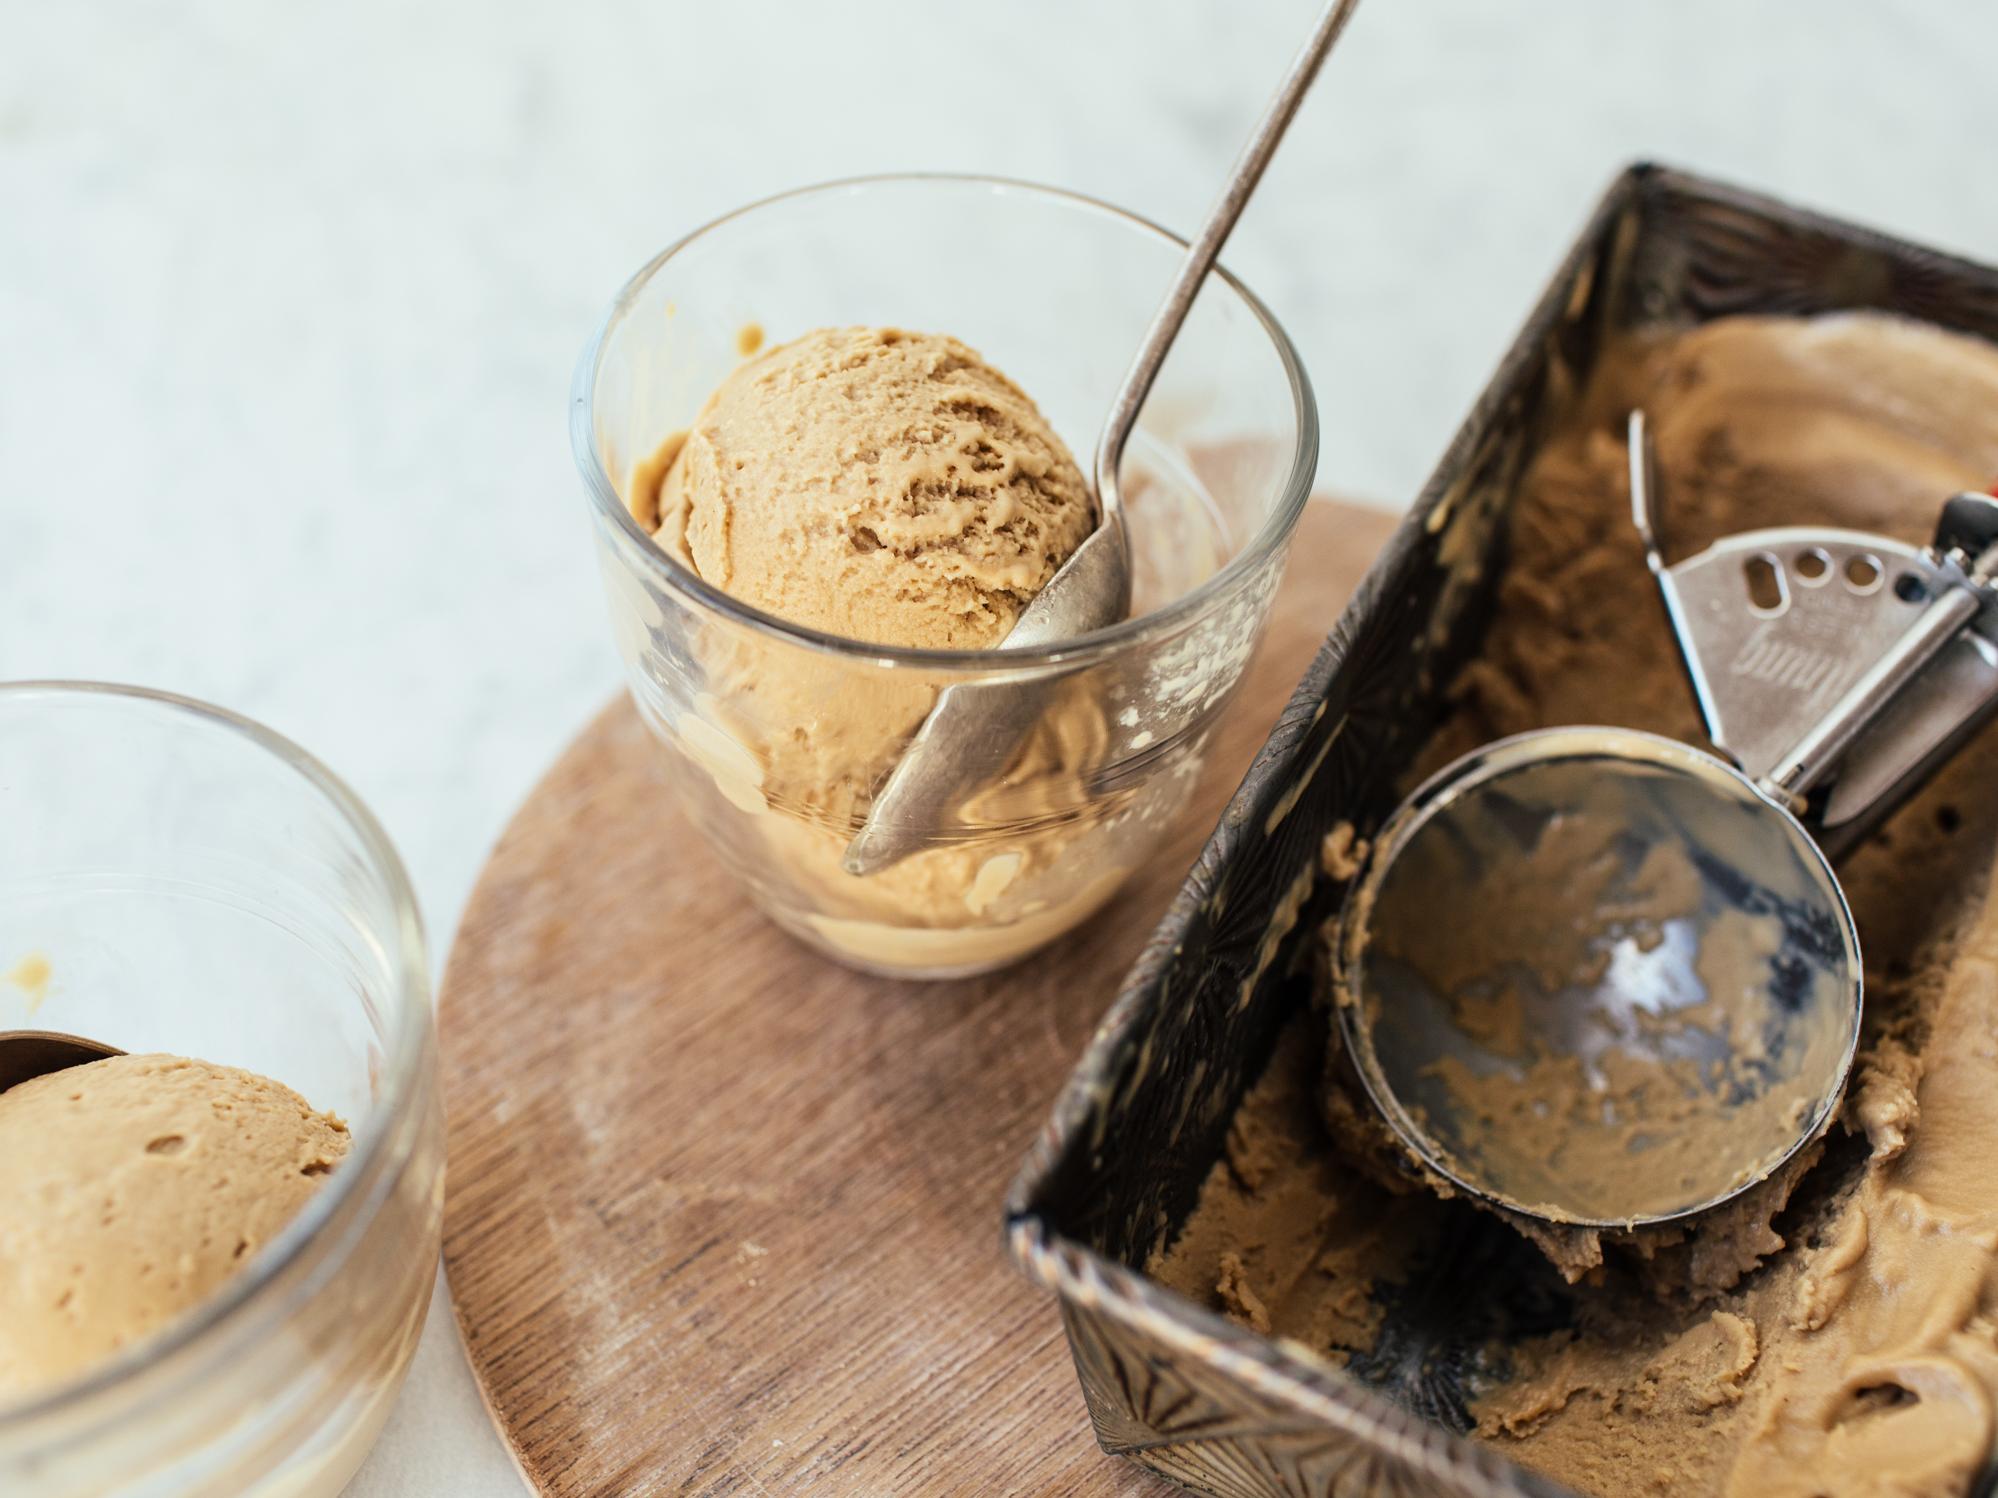  Satisfy your sweet tooth and caffeine fix at the same time with this Lighter Coffee Ice Cream recipe.